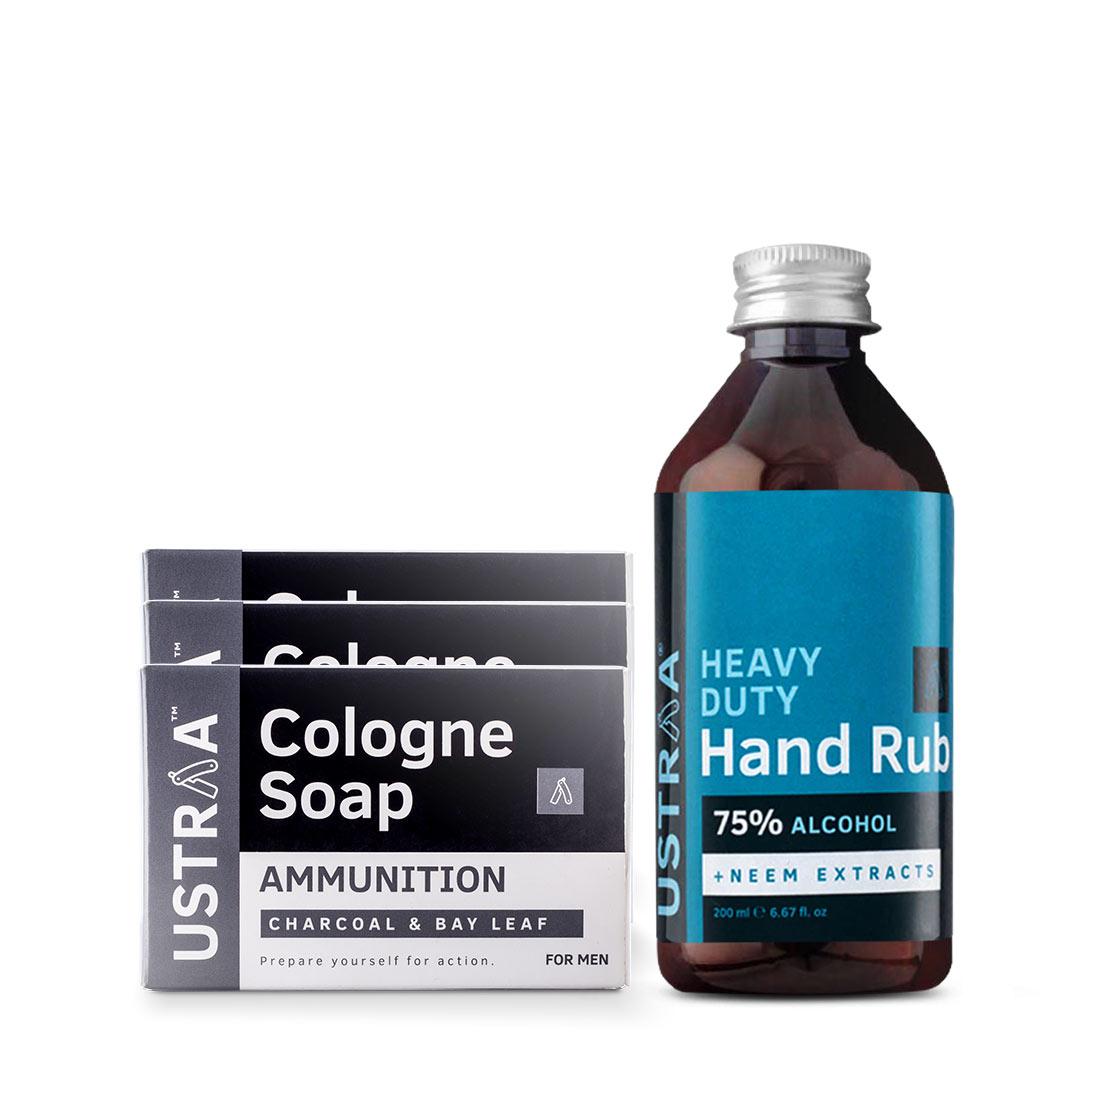 Cologne Soap - Ammunition - Set of 3 and Hand Rub - 200 ml